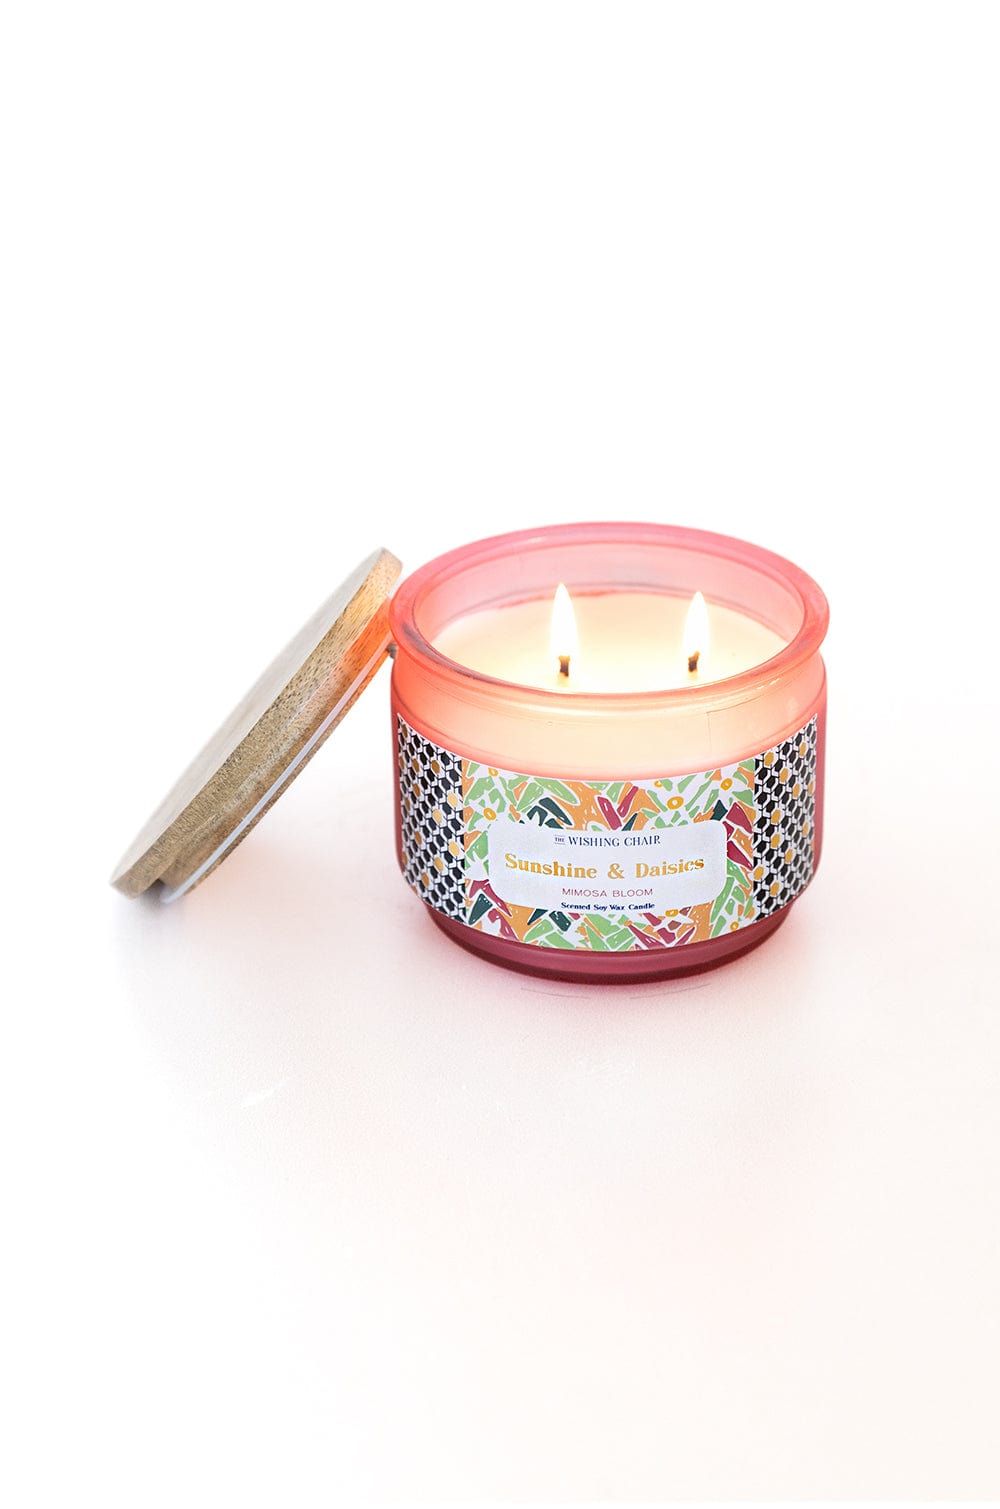 4 Dia x 3.25H Inch / Pink / Jar Candle Sunshine & Daisies Soy Wax Jar Candle